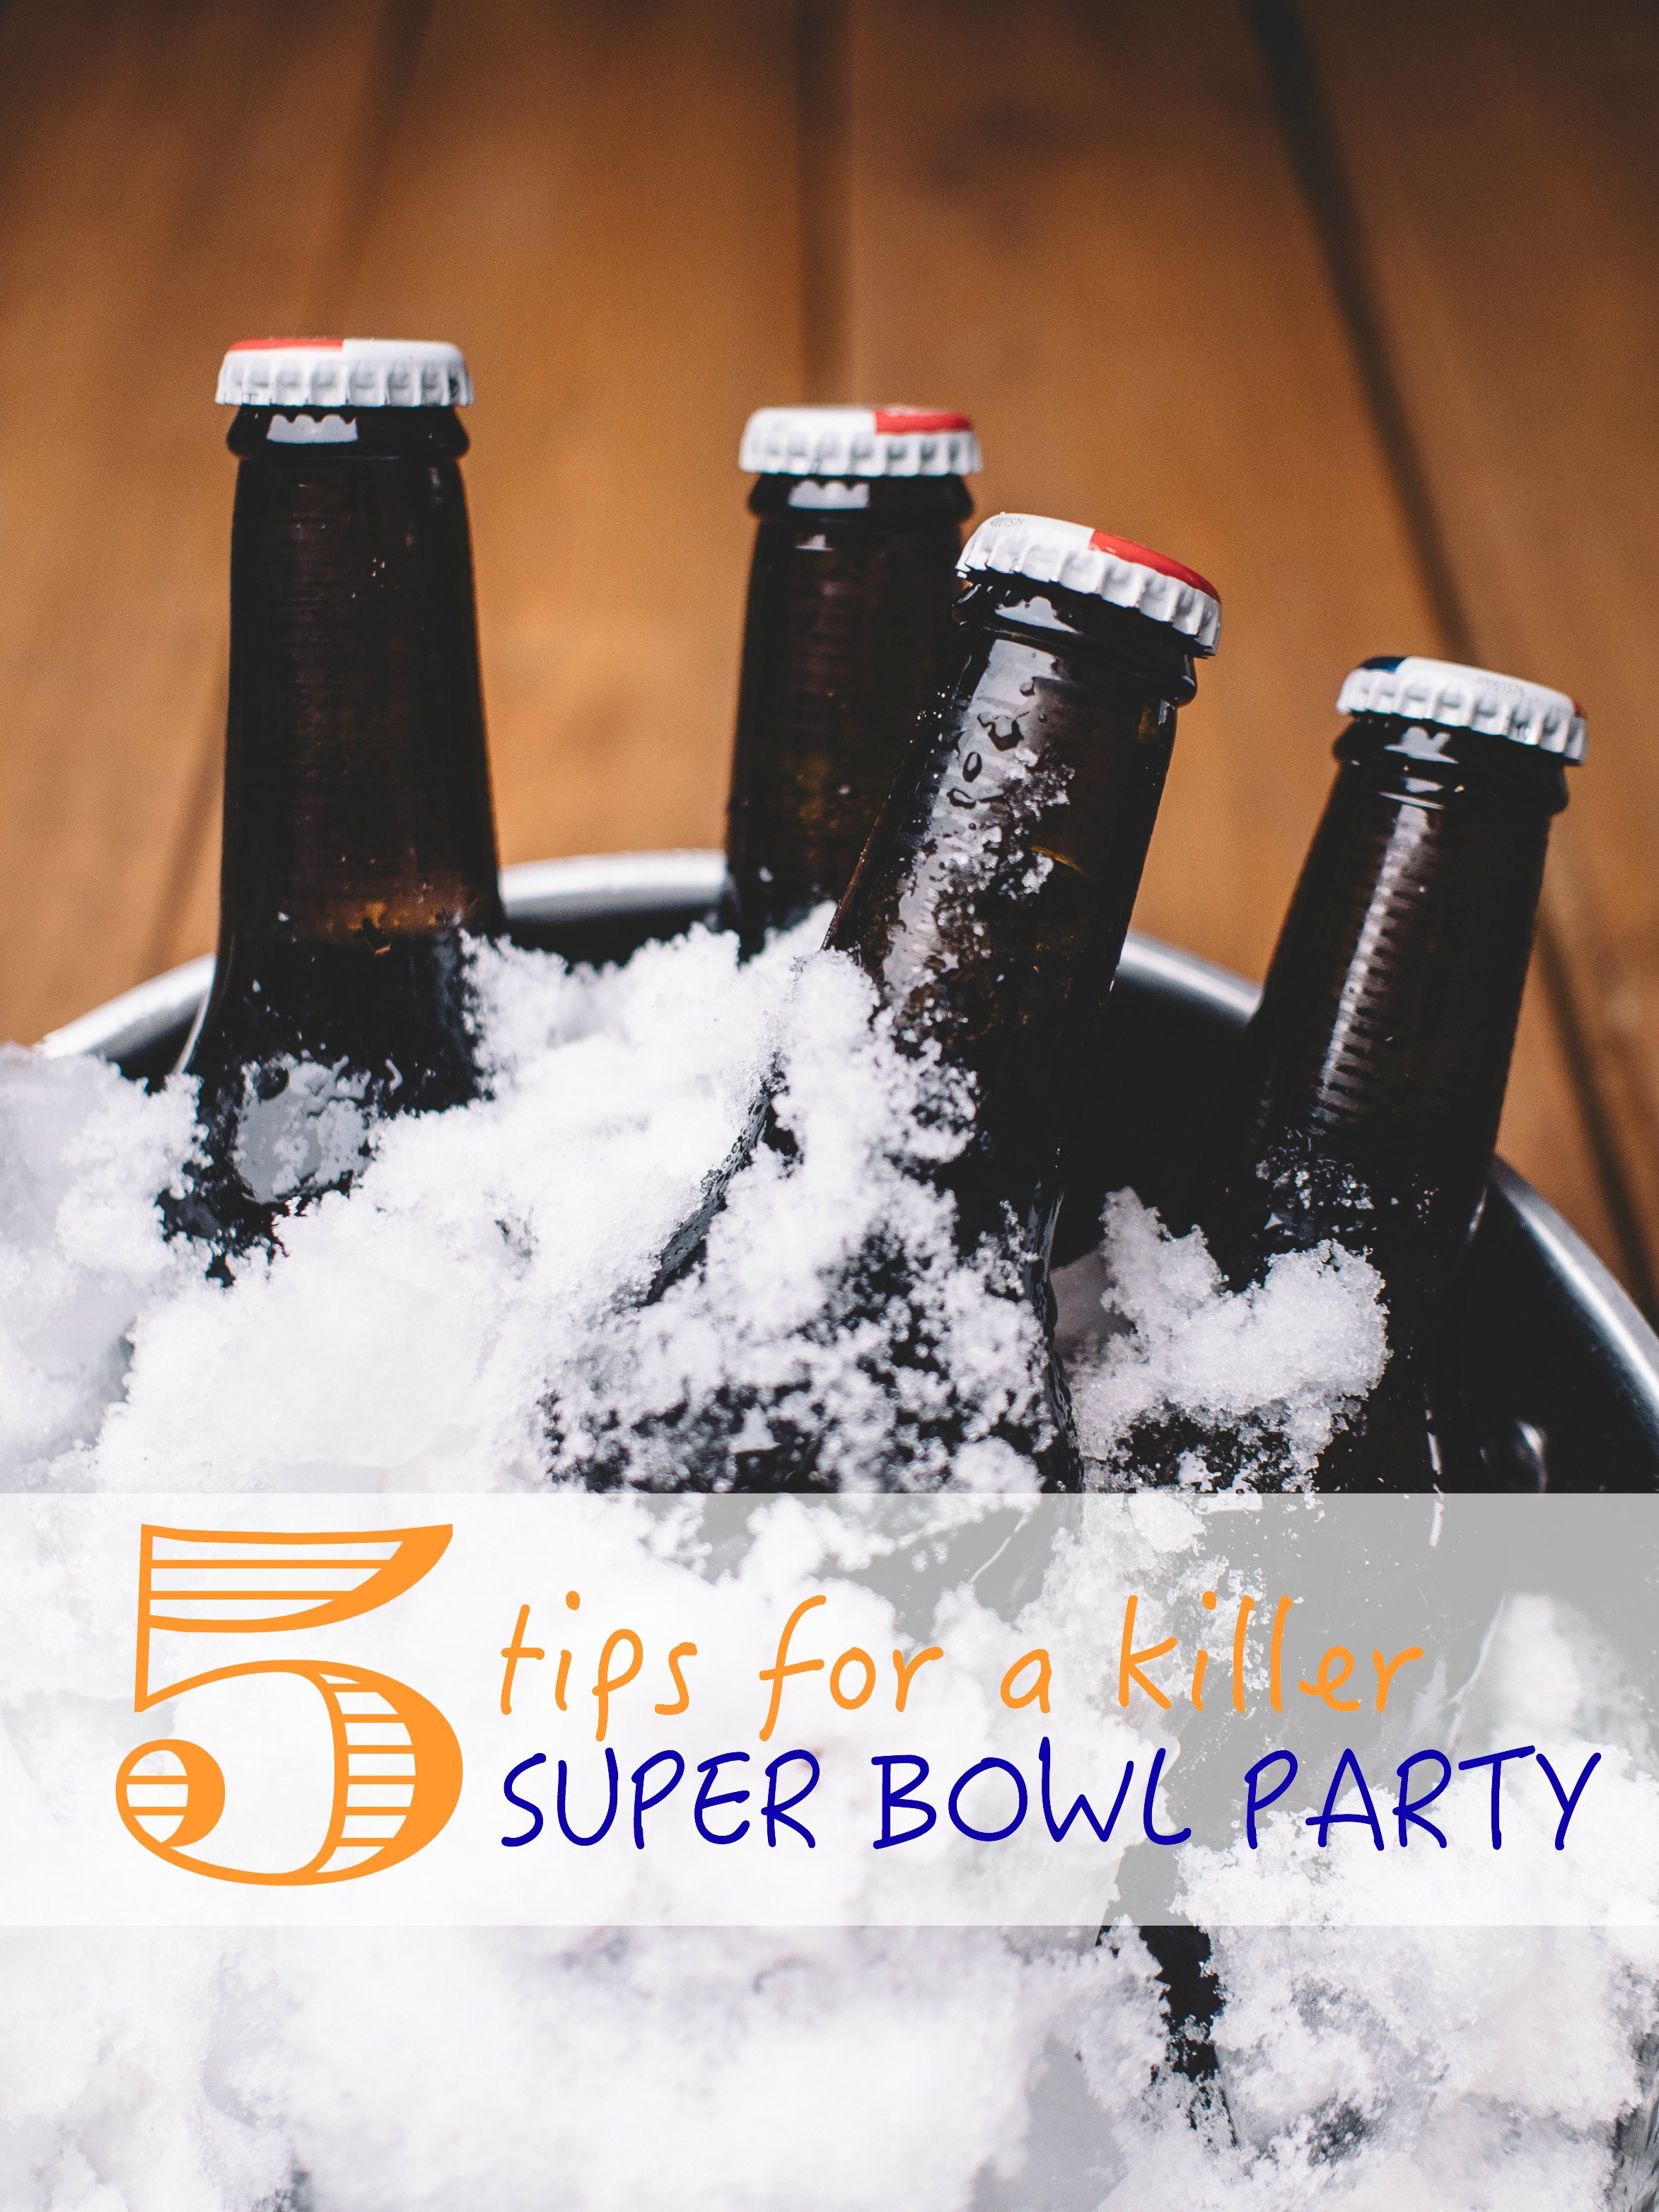 Tips and tricks for making your Super Bowl Party a success.